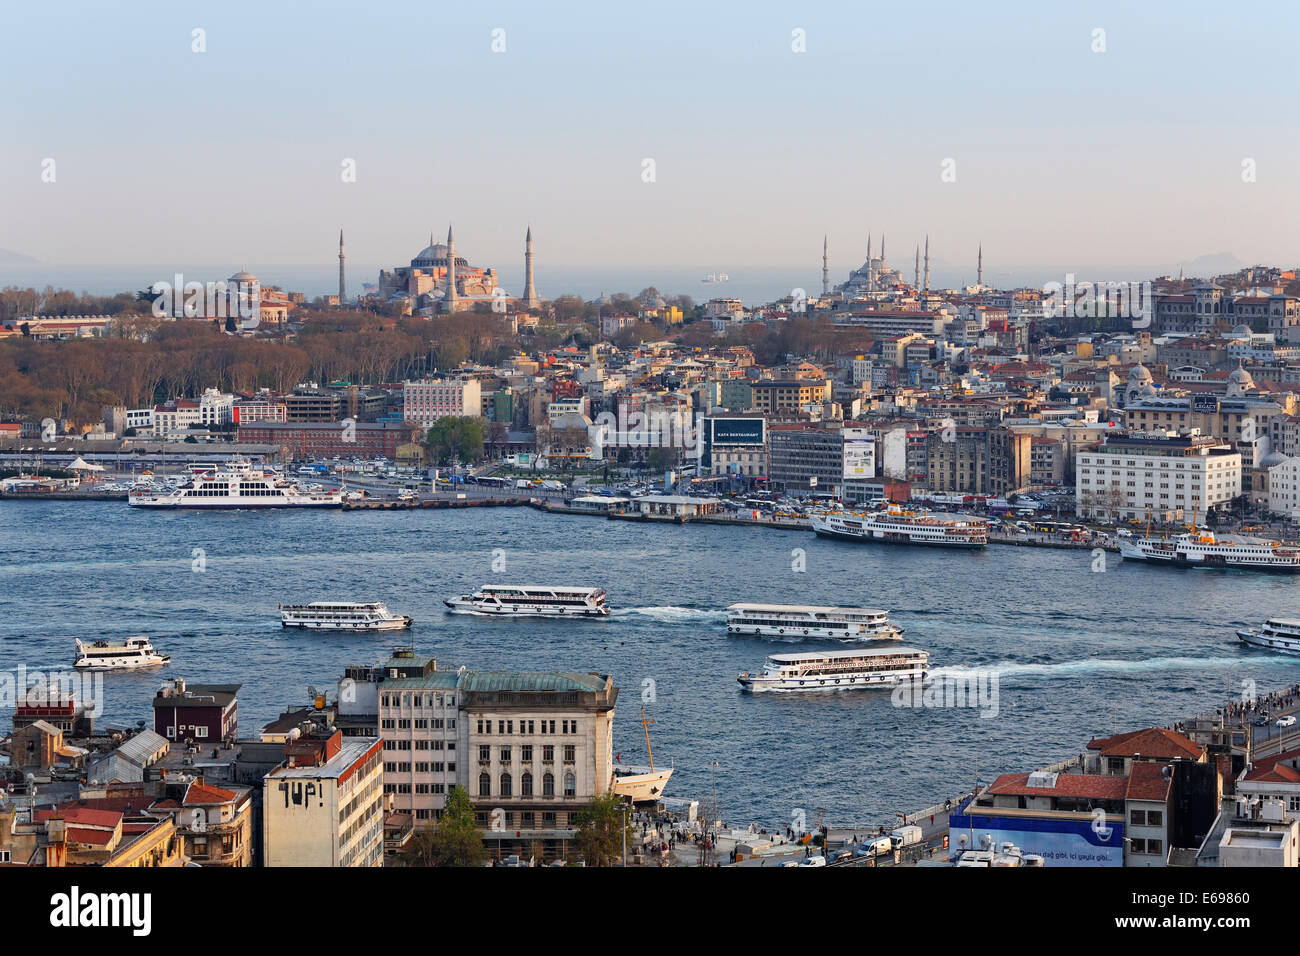 Hagia Sophia and Sultan Ahmed Mosque or Blue Mosque, ferries, Golden Horn, view from Galata Tower, Istanbul, European side Stock Photo